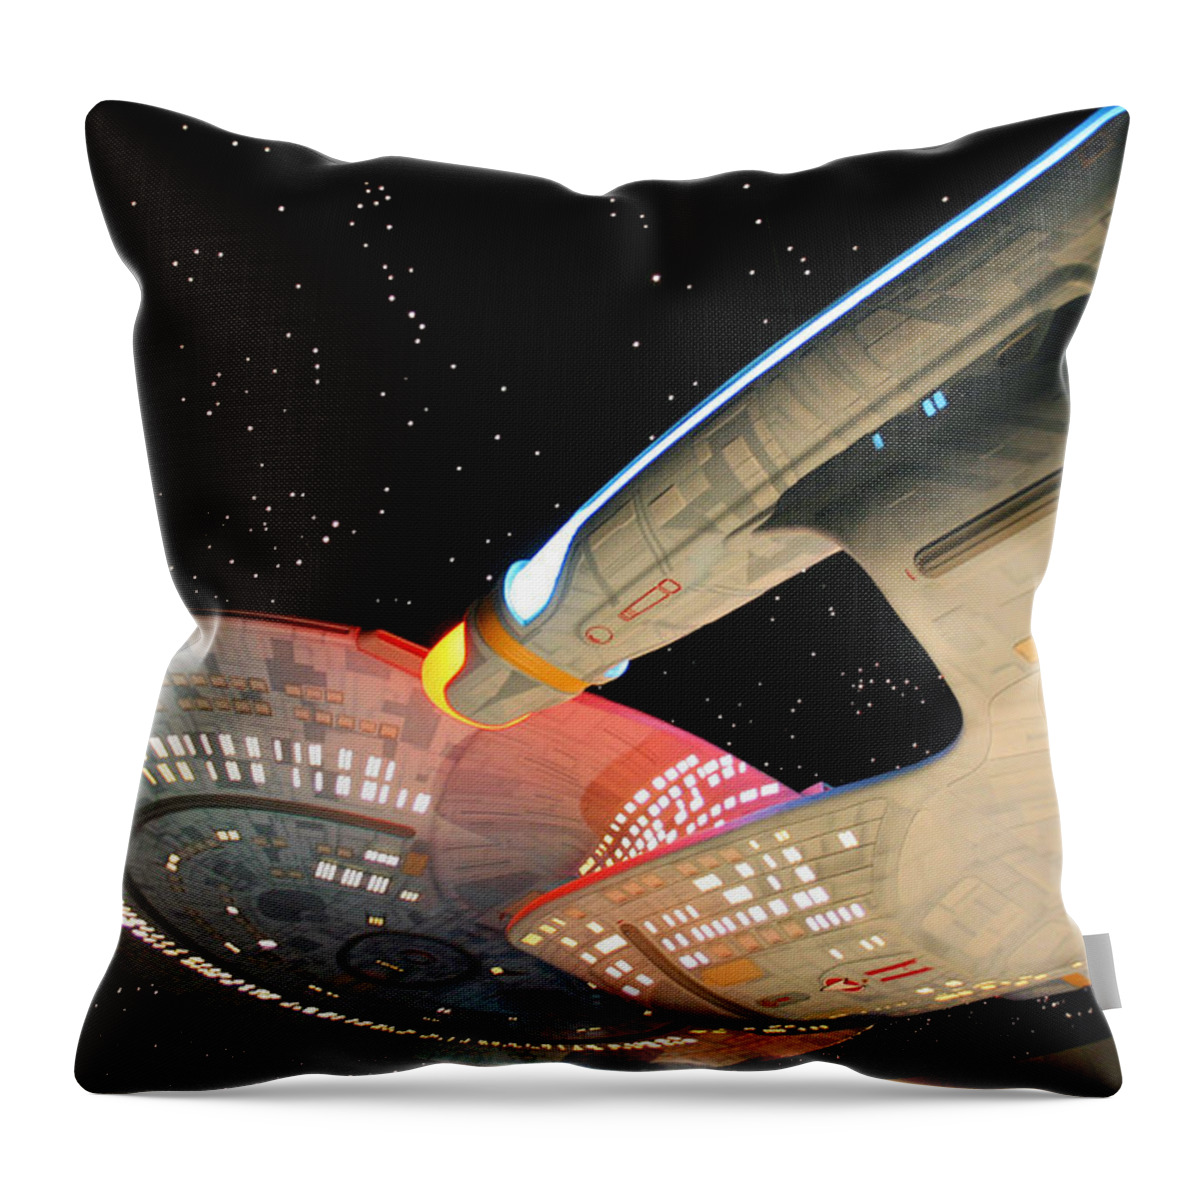 Spaceship Throw Pillow featuring the photograph To Boldly Go by Kristin Elmquist